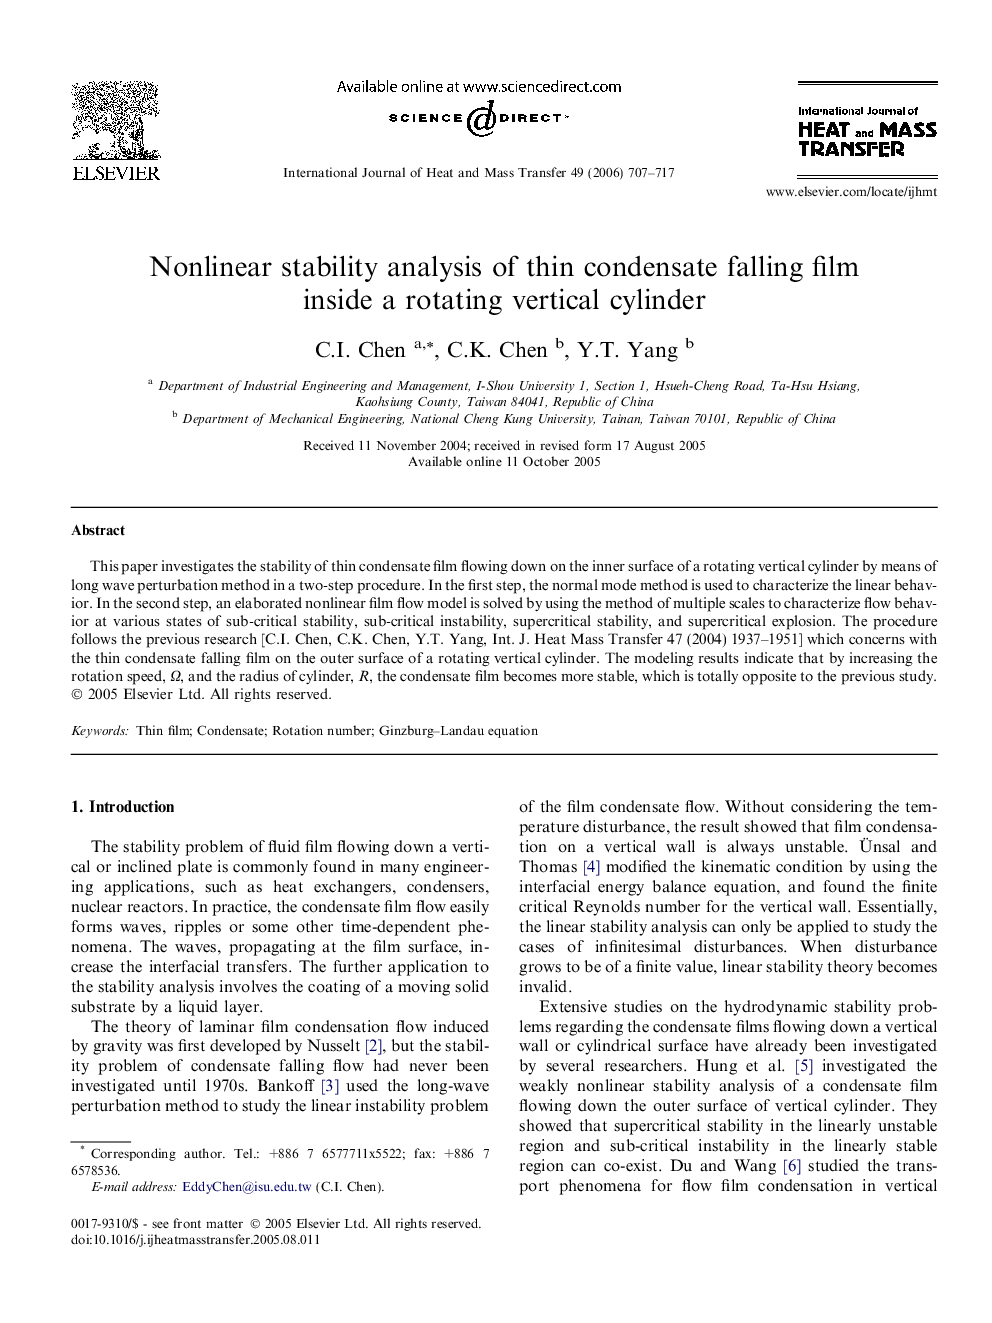 Nonlinear stability analysis of thin condensate falling film inside a rotating vertical cylinder